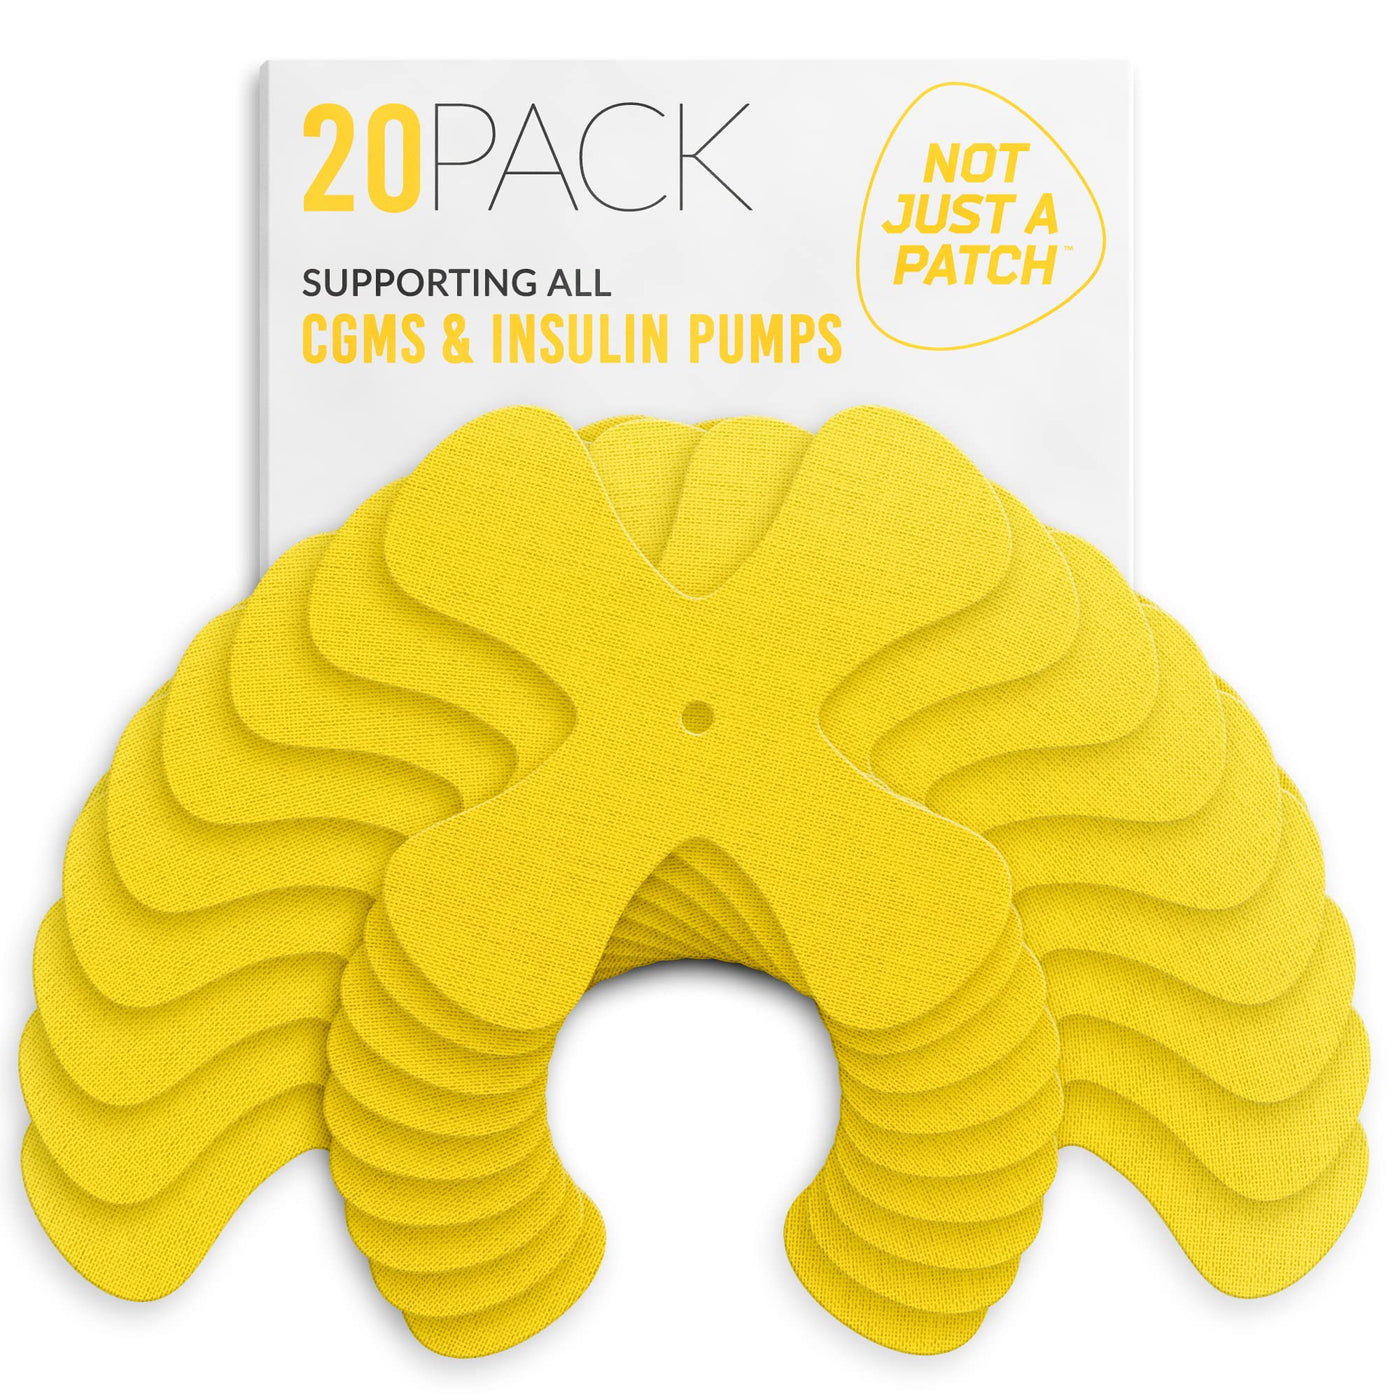 Not Just A Patch X-Patch CGM Sensor Patches (20 Pack)- Water